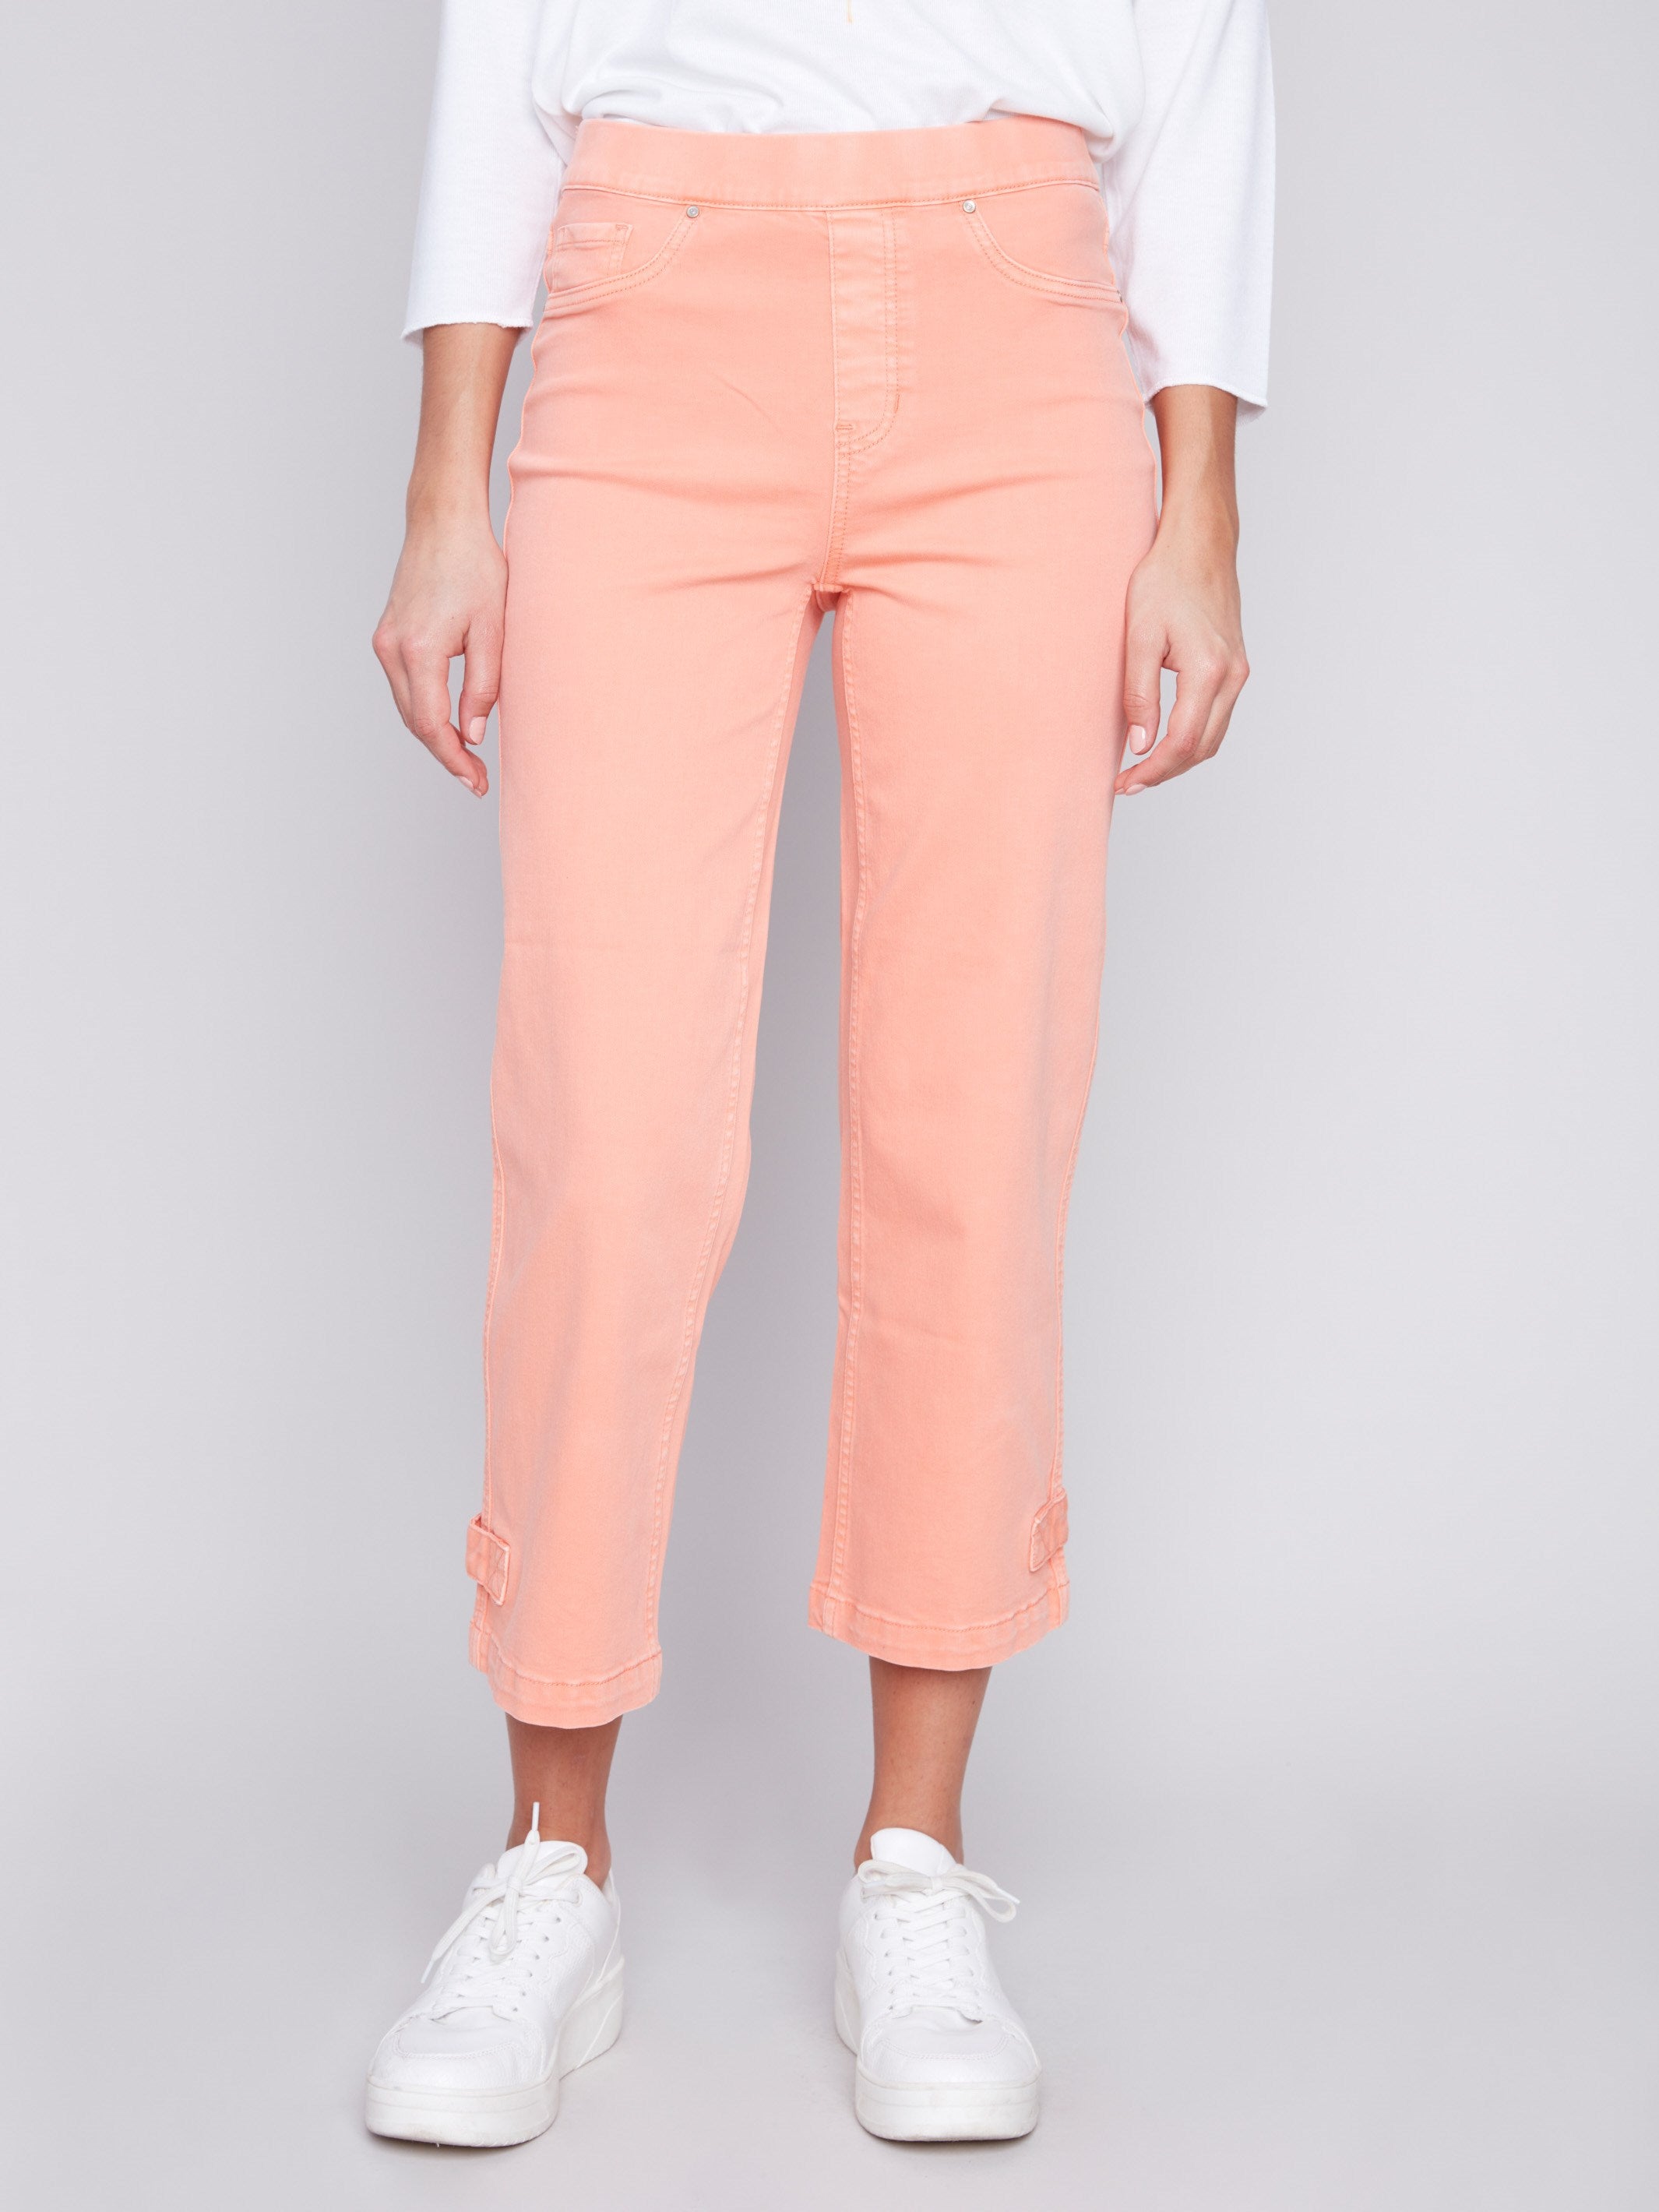 Cropped Pull-On Twill Pants with Hem Tab - Tangerine - Charlie B Collection Canada - Image 2